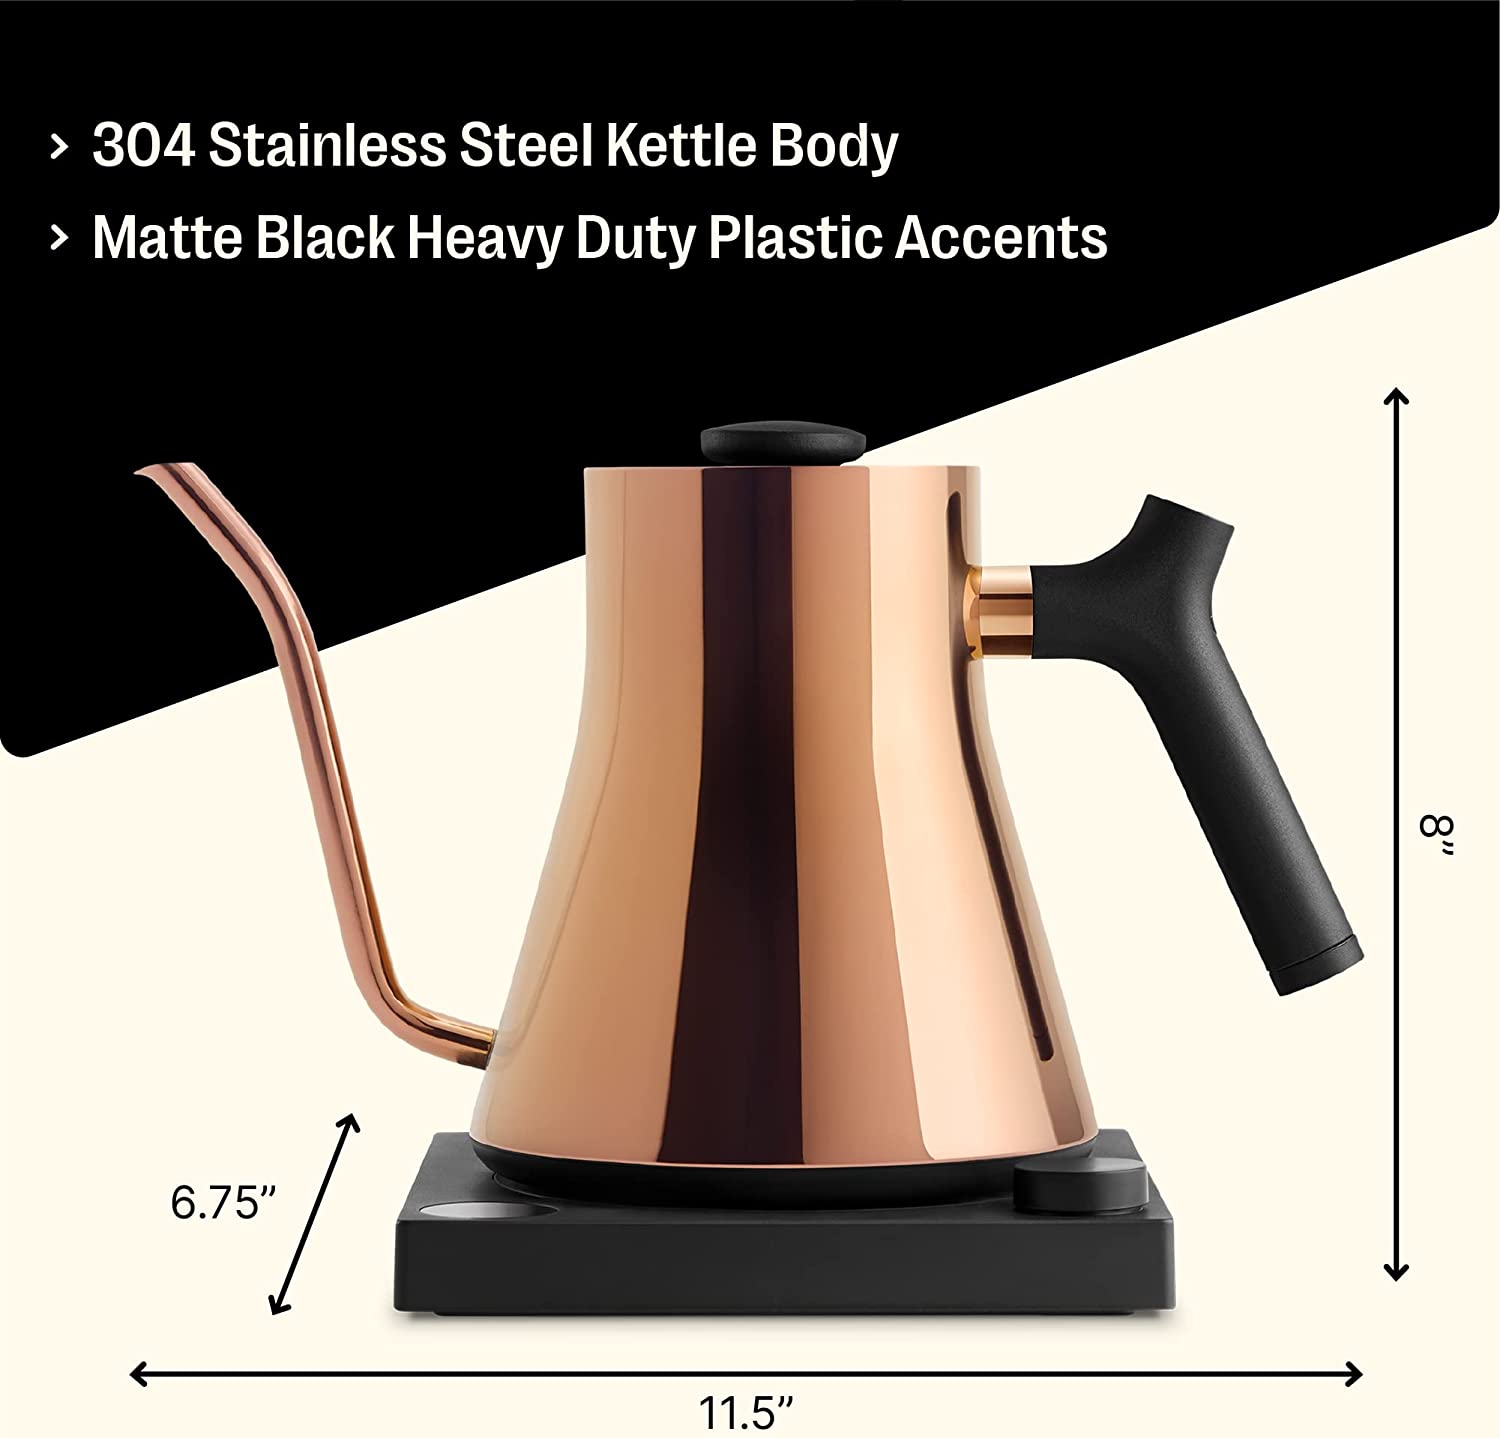 https://discounttoday.net/wp-content/uploads/2023/01/Fellow-Stagg-EKG-Electric-Gooseneck-Kettle-Pour-Over-Coffee-and-Tea-Kettle-Stainless-Steel-Kettle-Water-Boiler-Quick-Heating-Electric-Kettles-for-Boiling-Water-Polished-Copper3.jpg